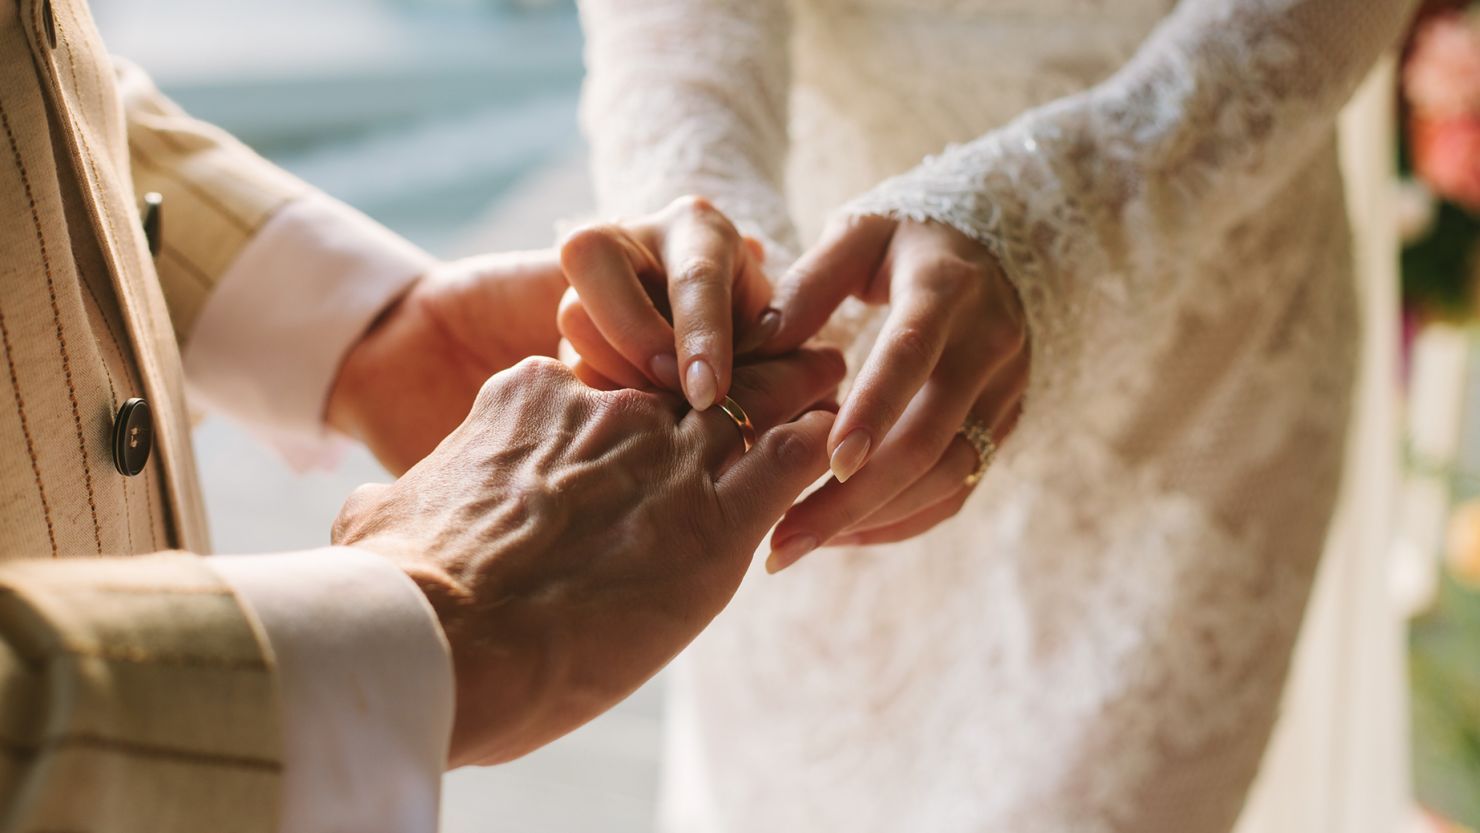 Marriage rates were up in 2022, and divorce rates continued to drop, according to the data.